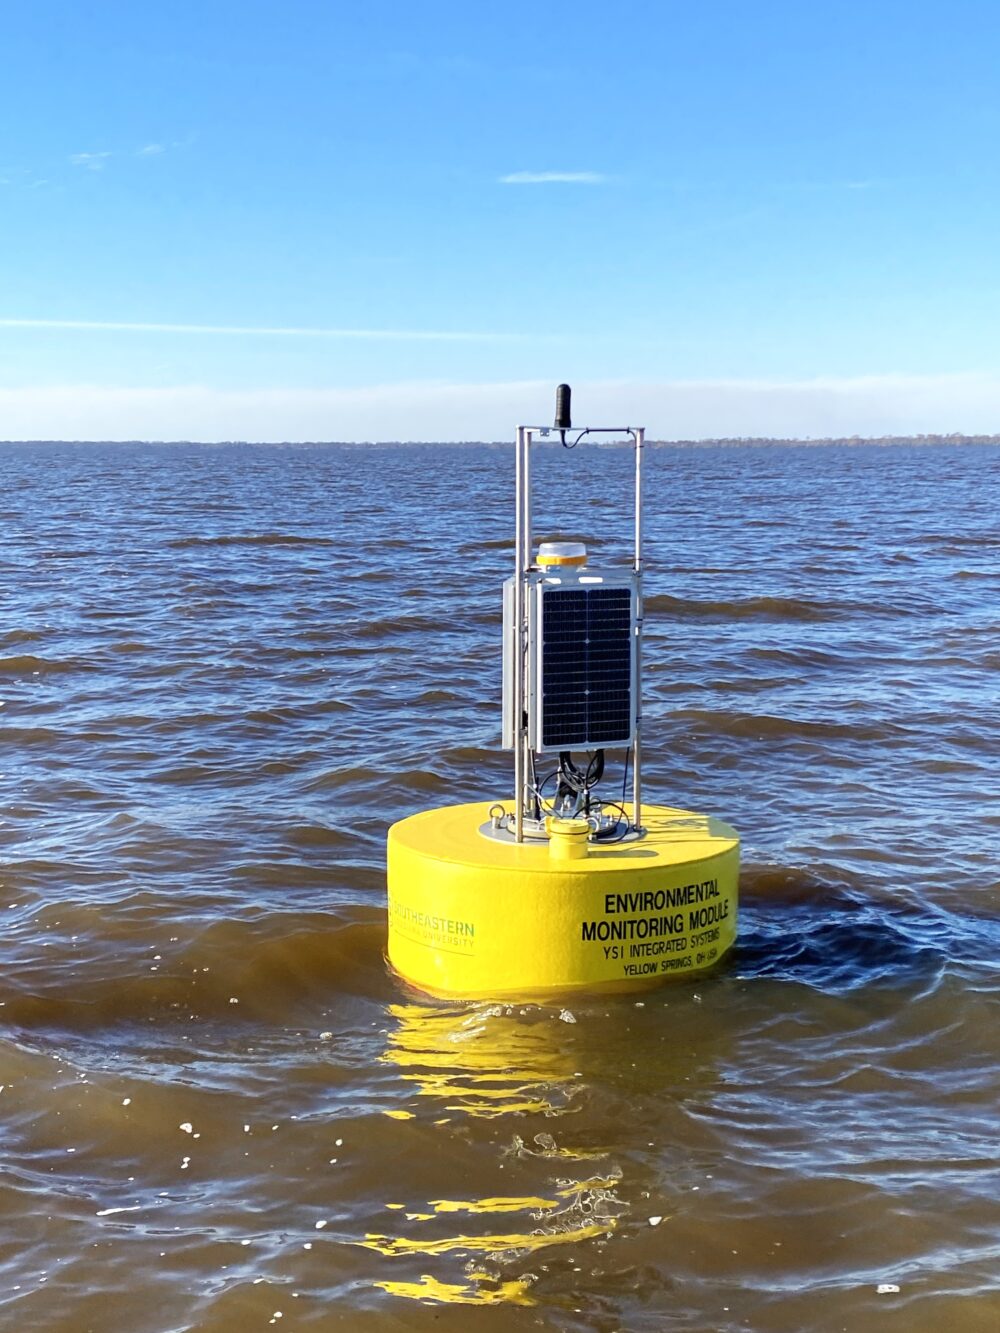 A yellow apparatus floats in the water. It is labeled, "Environmental Monitoring Module".